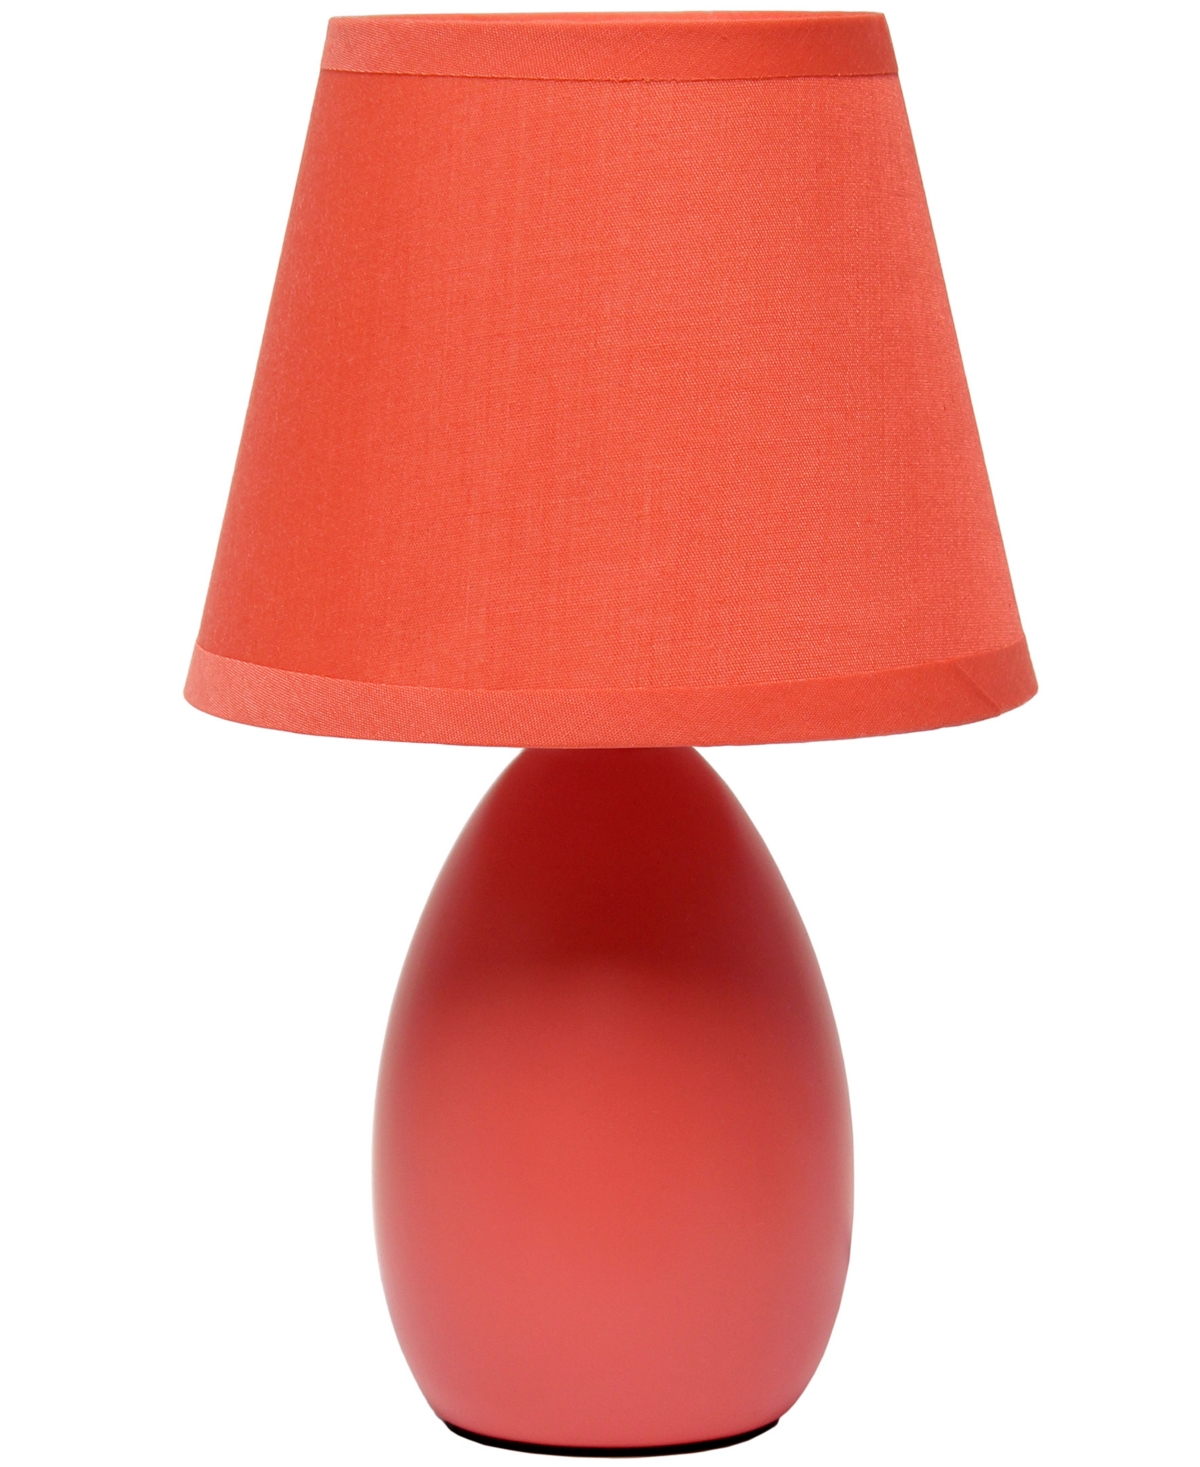 Shop Creekwood Home Nauru 9.45" Traditional Petite Ceramic Oblong Bedside Table Desk Lamp With Tapered Drum Fabric Shade In Orange